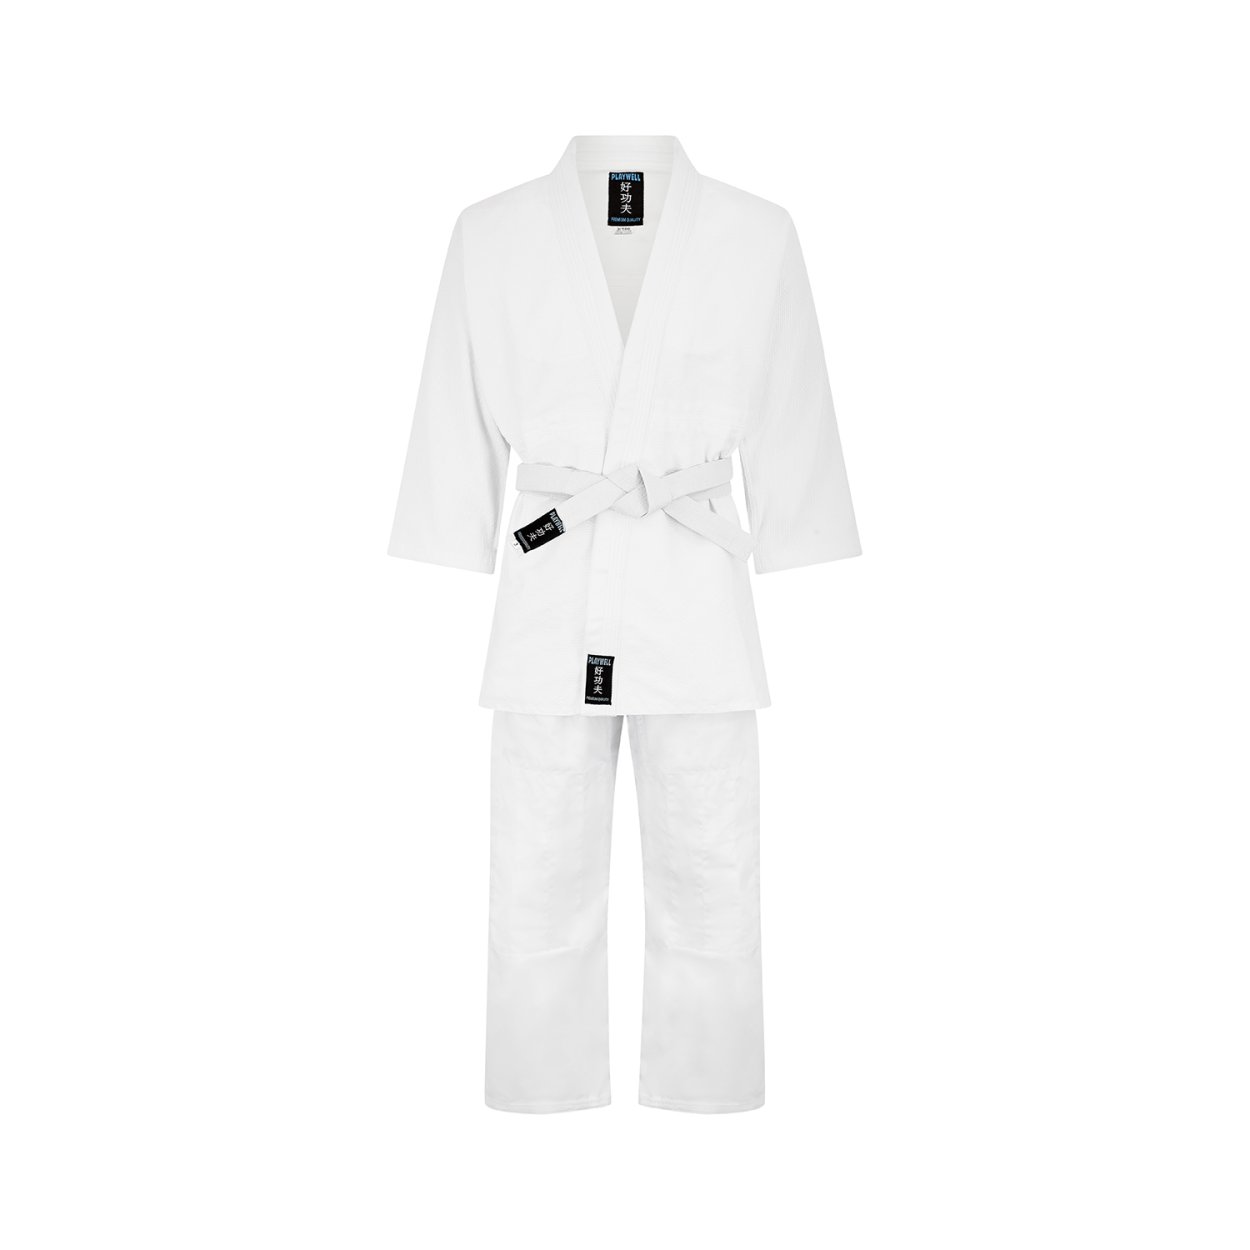 Playwell Premium Adults Judo Suit - White 400g - Click Image to Close